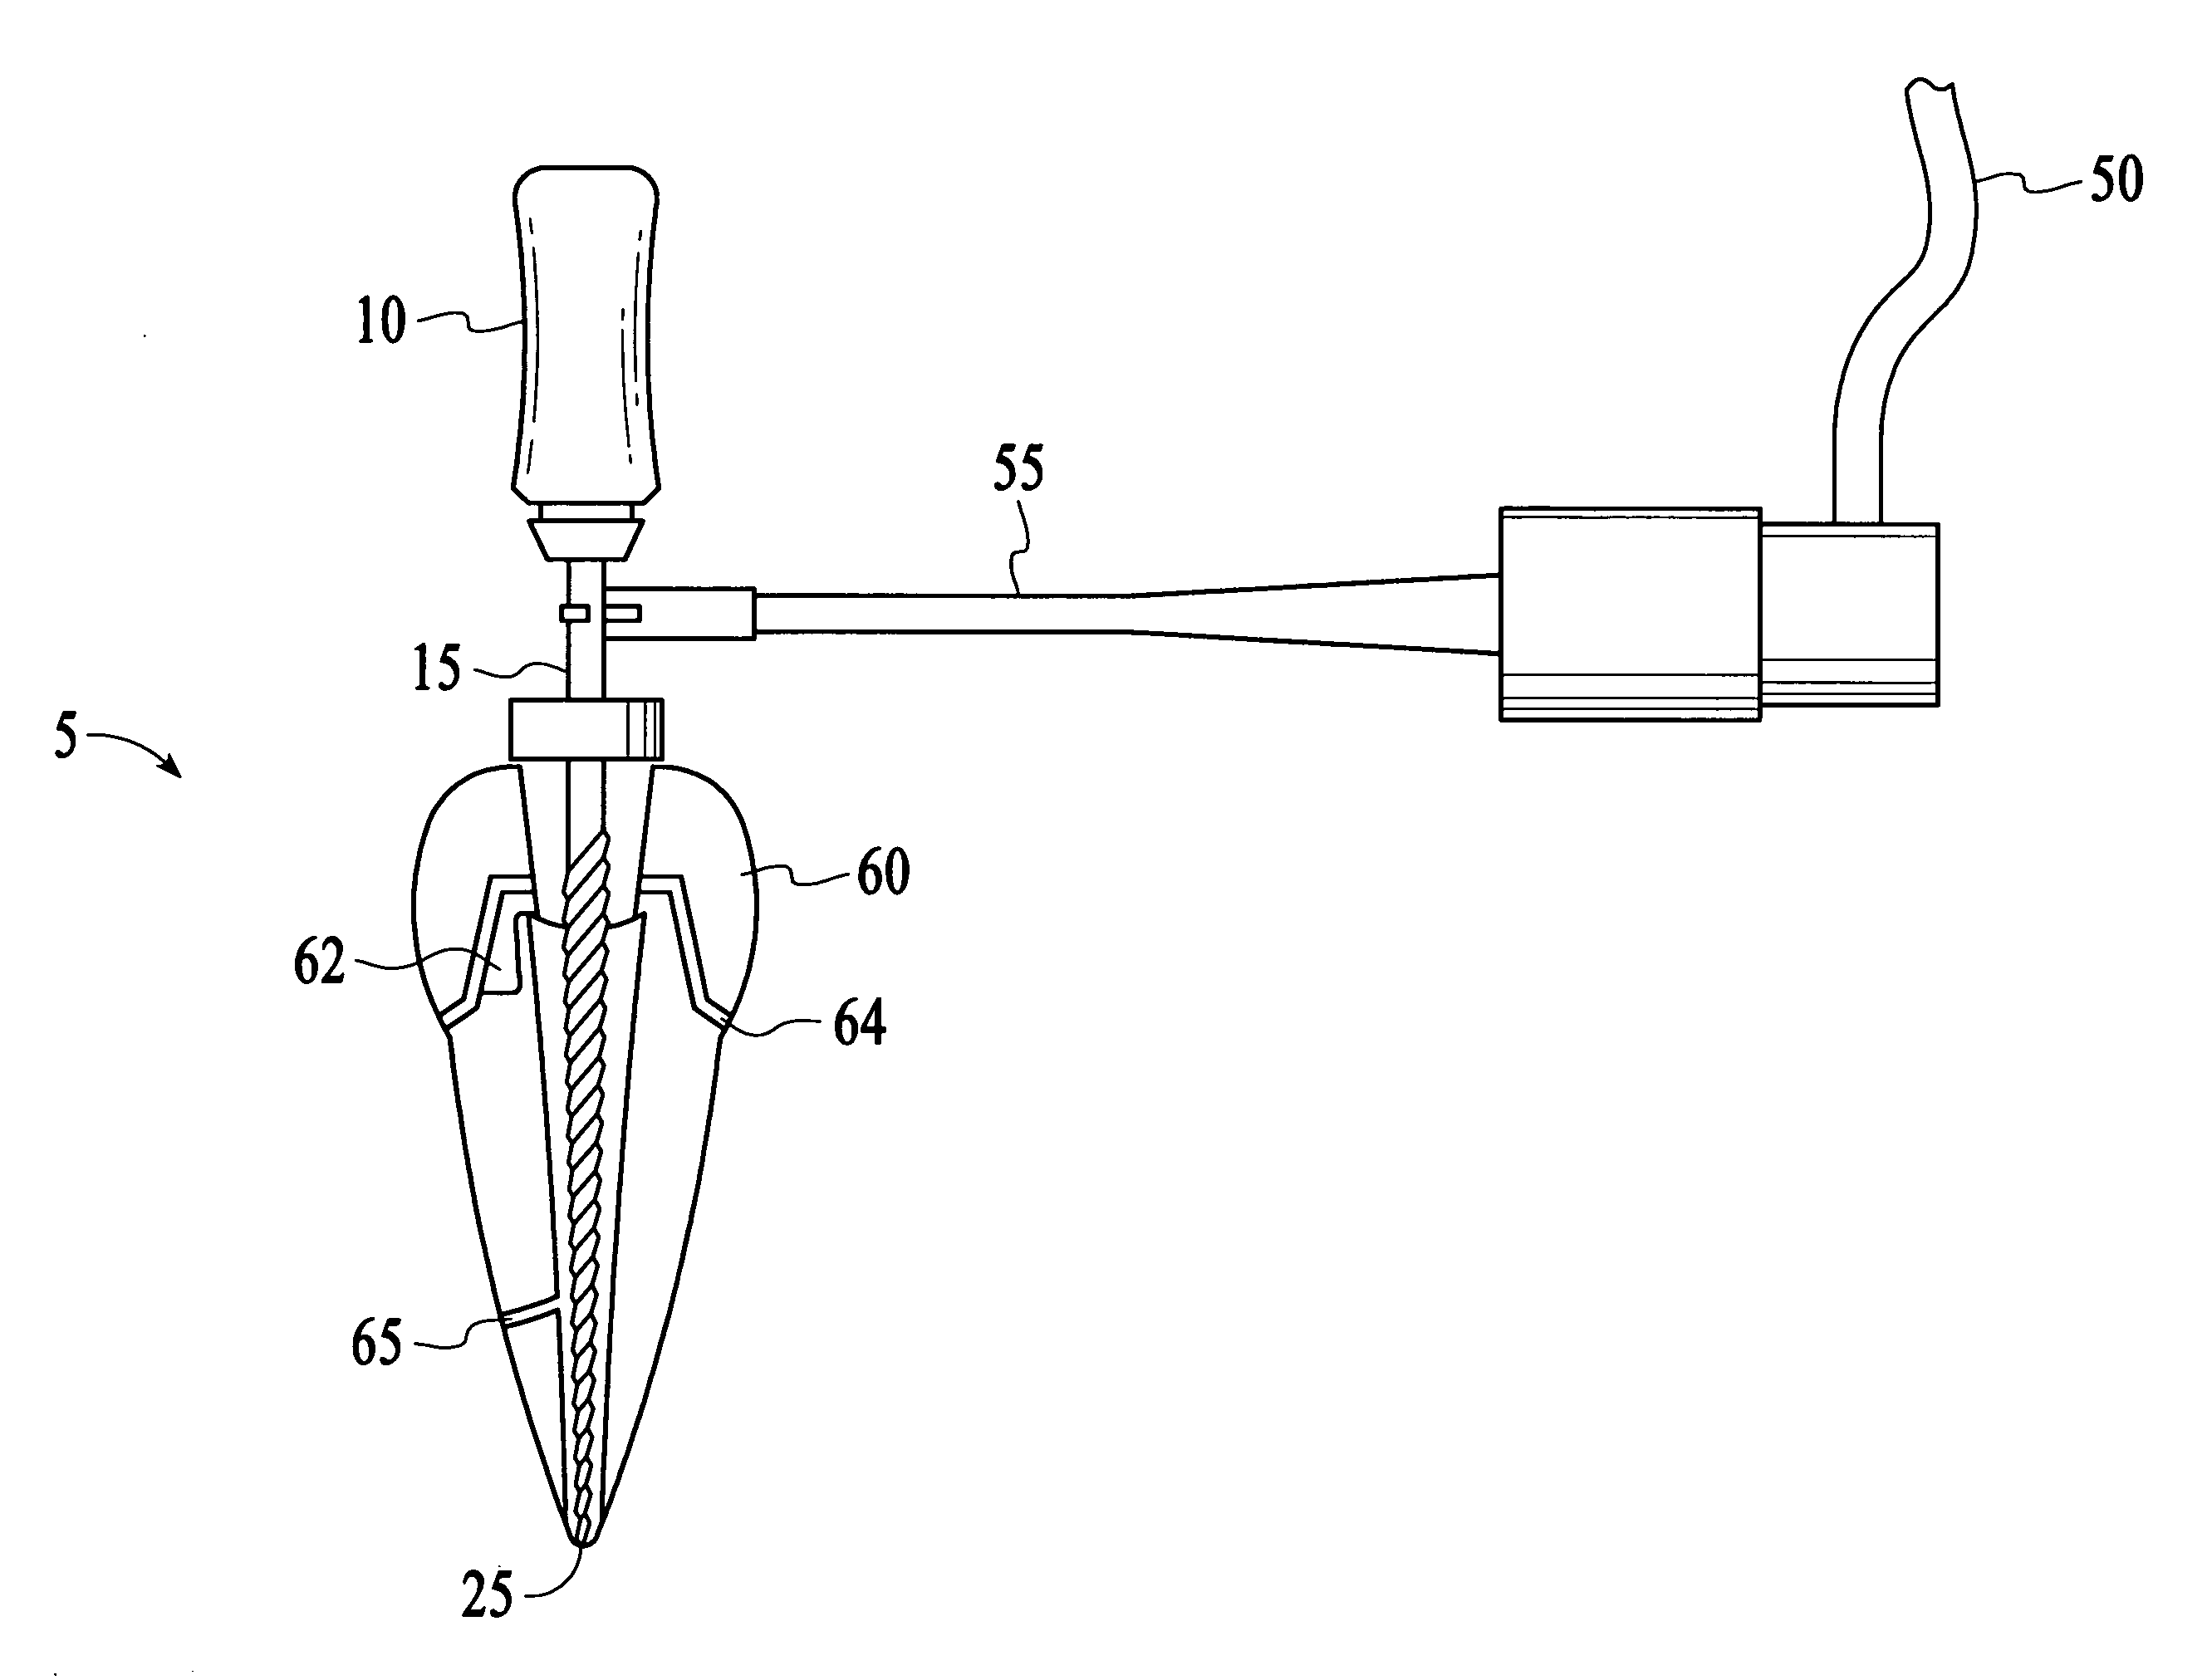 Endodontic instrument with non-conductive coating and method for locating the apex of a tooth